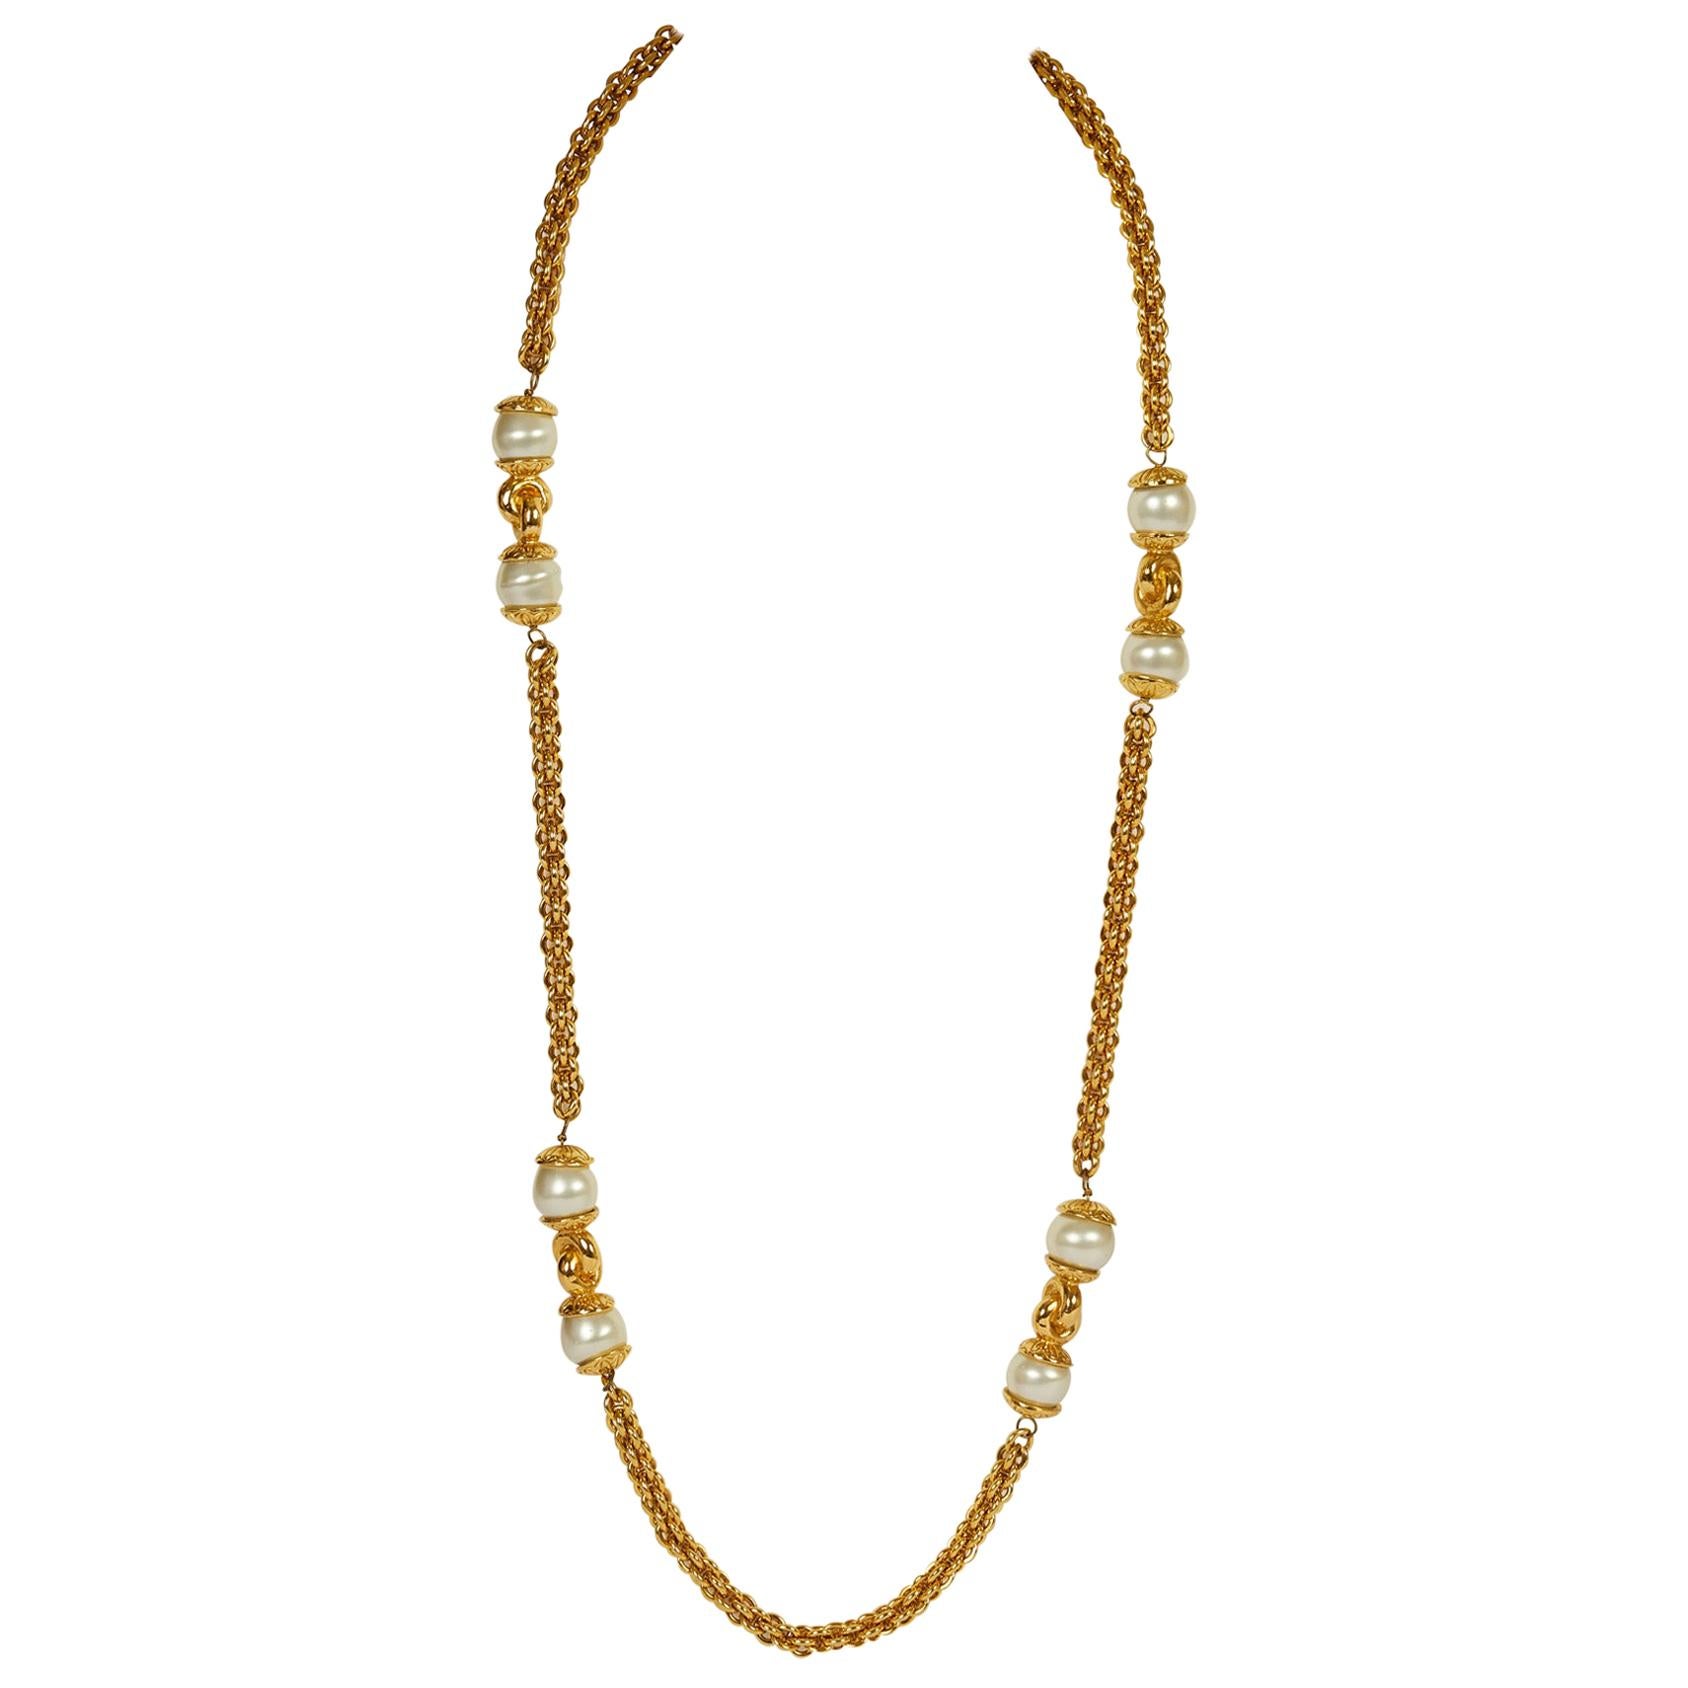 Vintage 70's Chanel Gold & Pearls Sautoir Necklace